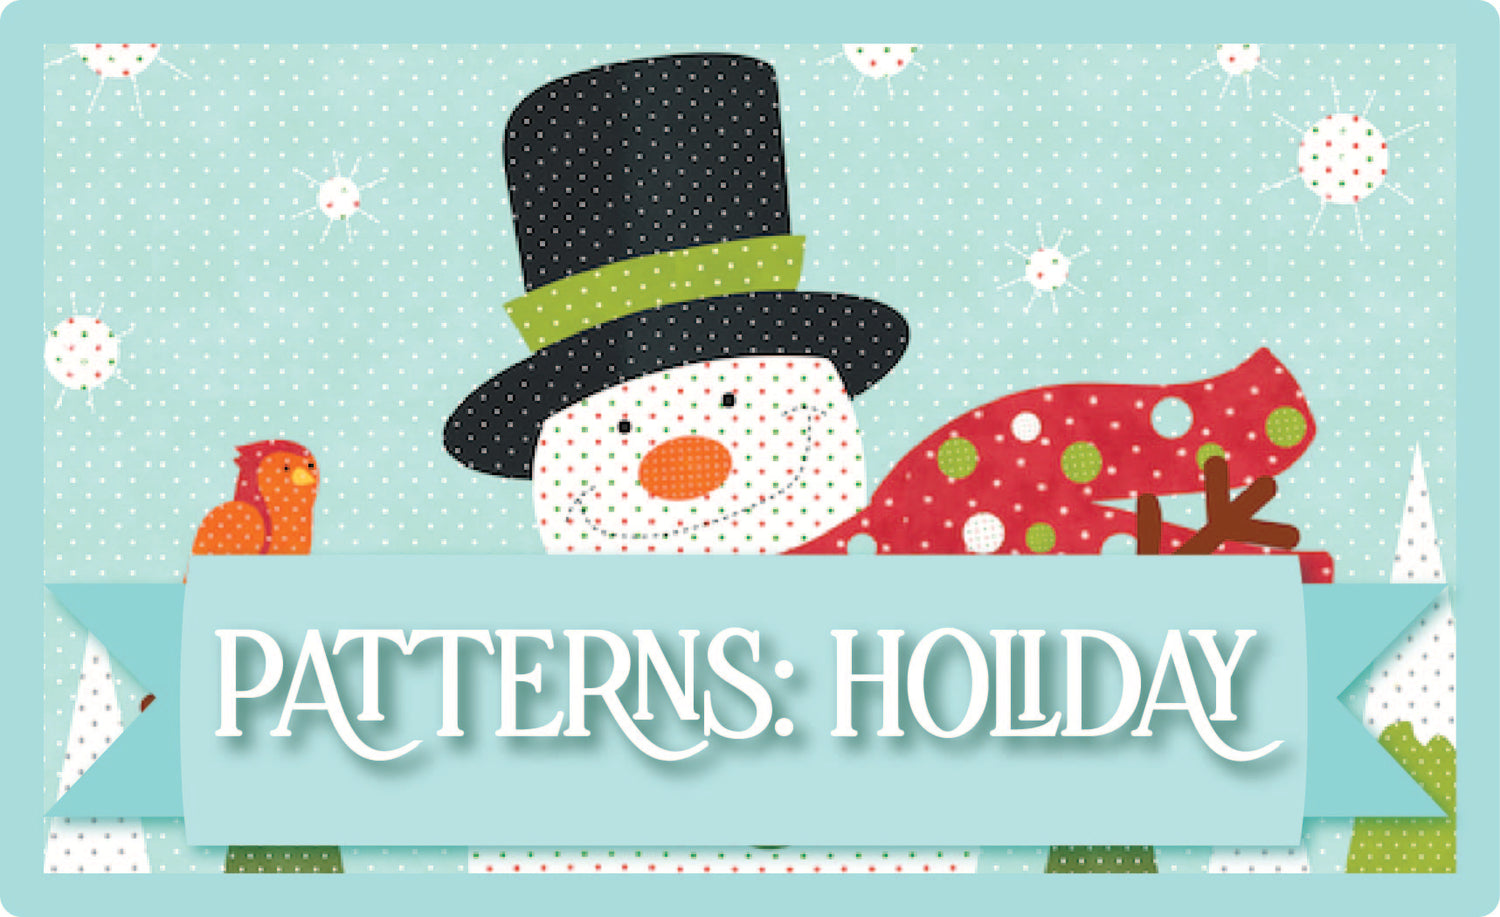 Quilt Patterns: Holiday/Seasons